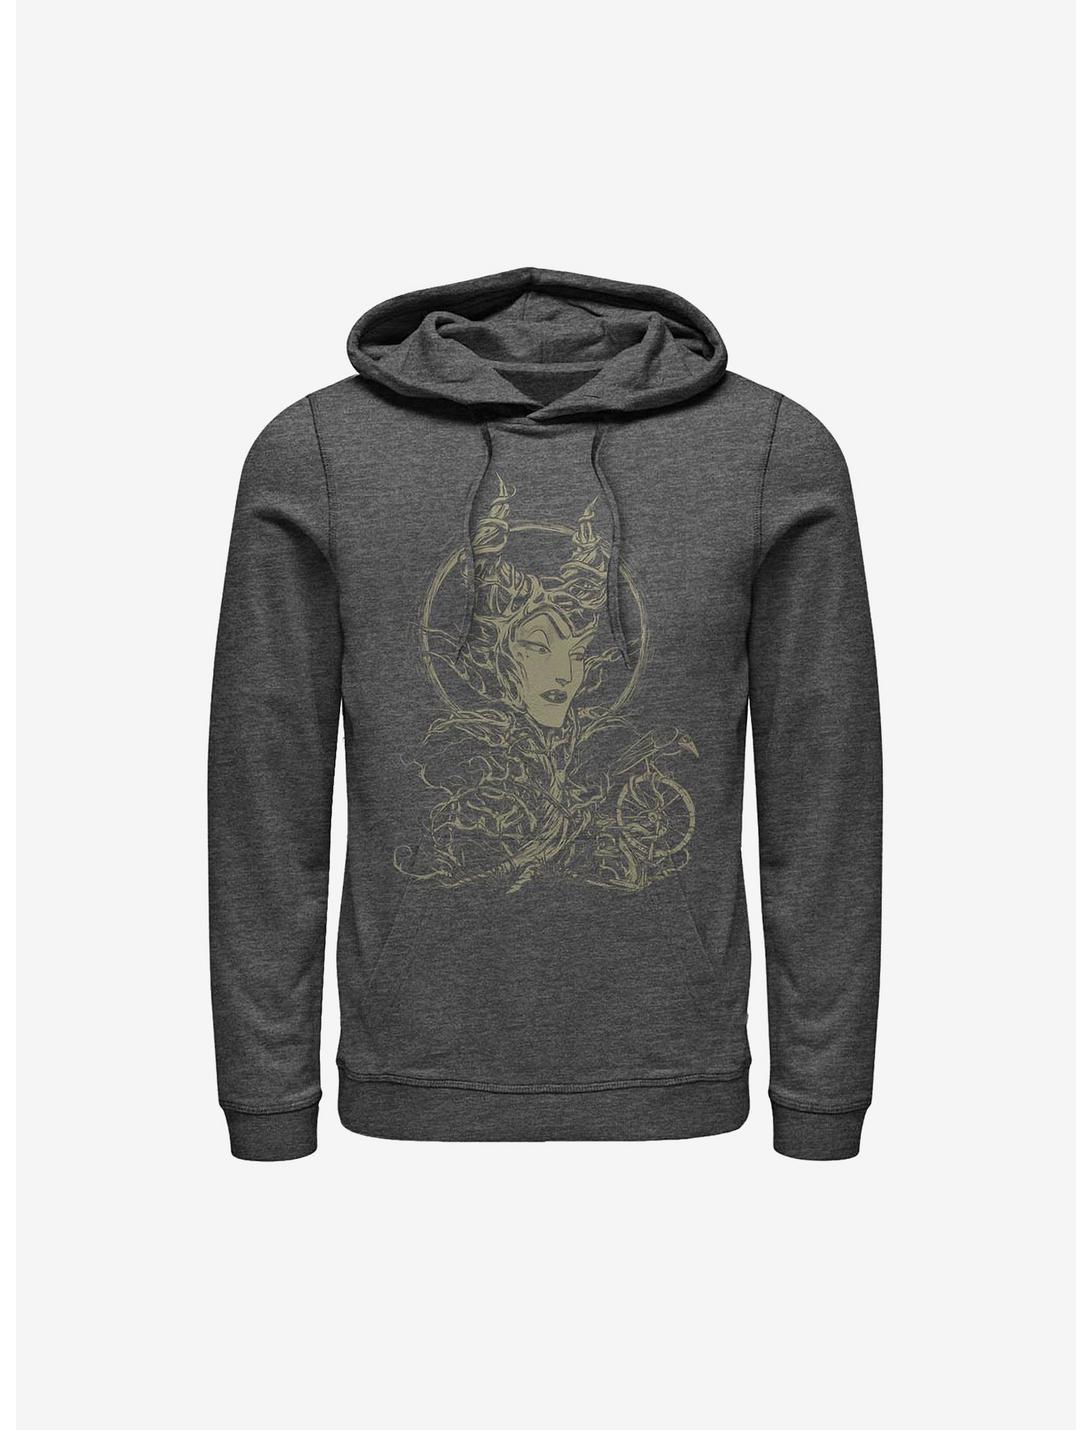 Disney Maleficent The Gift Hoodie, CHAR HTR, hi-res